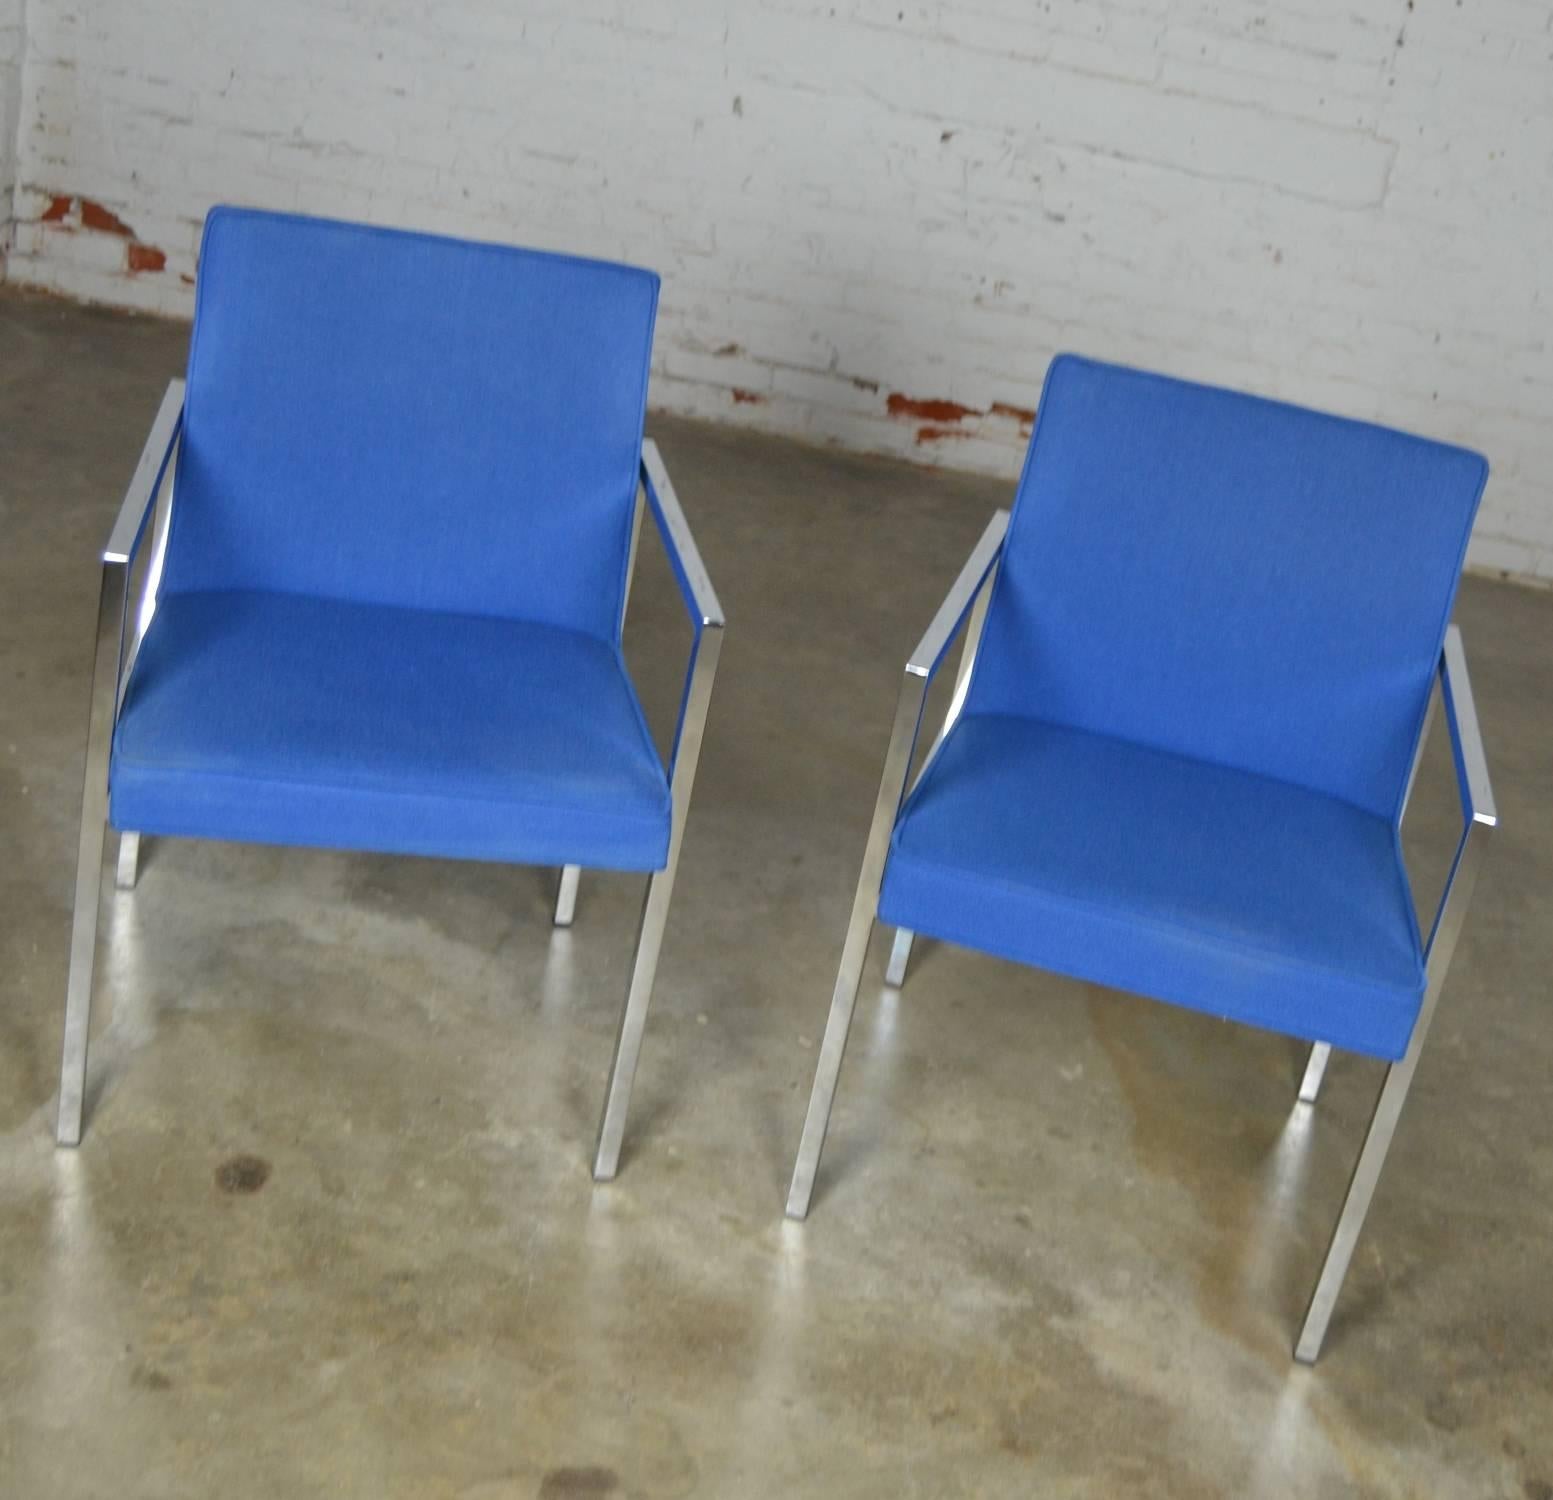 Gorgeous pair of royal blue and chrome armchairs by Hibriten Chair Company of North Carolina in the style of Milo Baughman. They are in wonderful vintage condition and circa 1970.

These chrome and royal blue hopsacking upholstered chairs in the